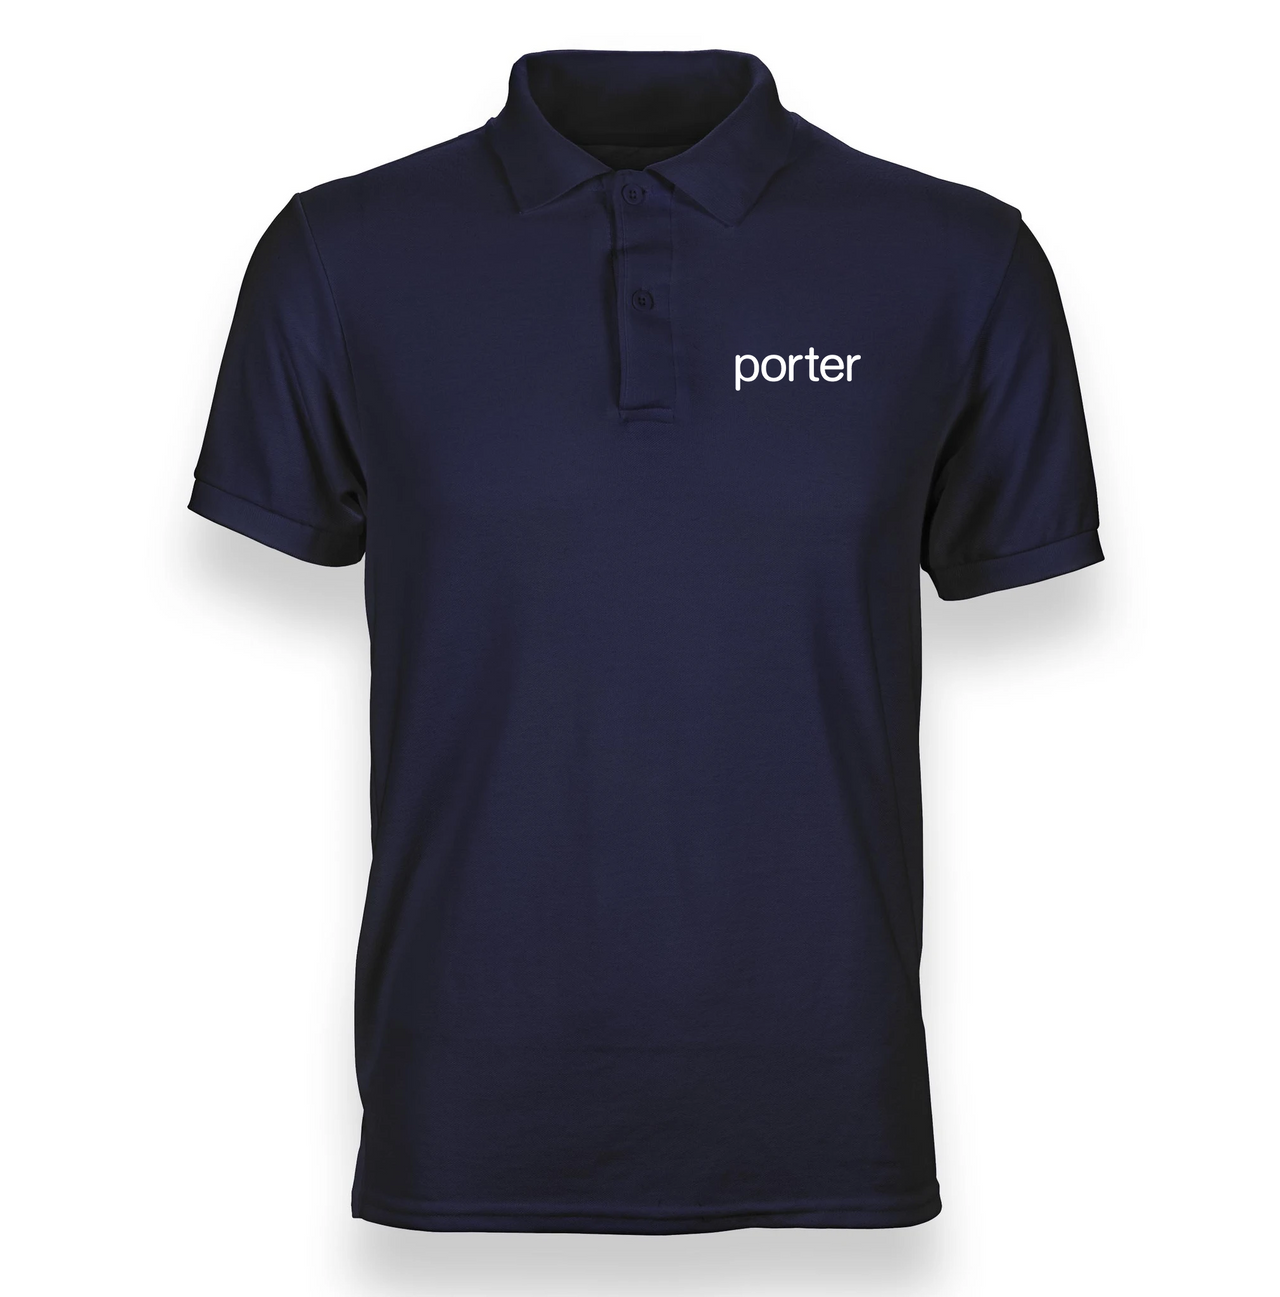 PROTER AIRLINES POLO T-SHIRT